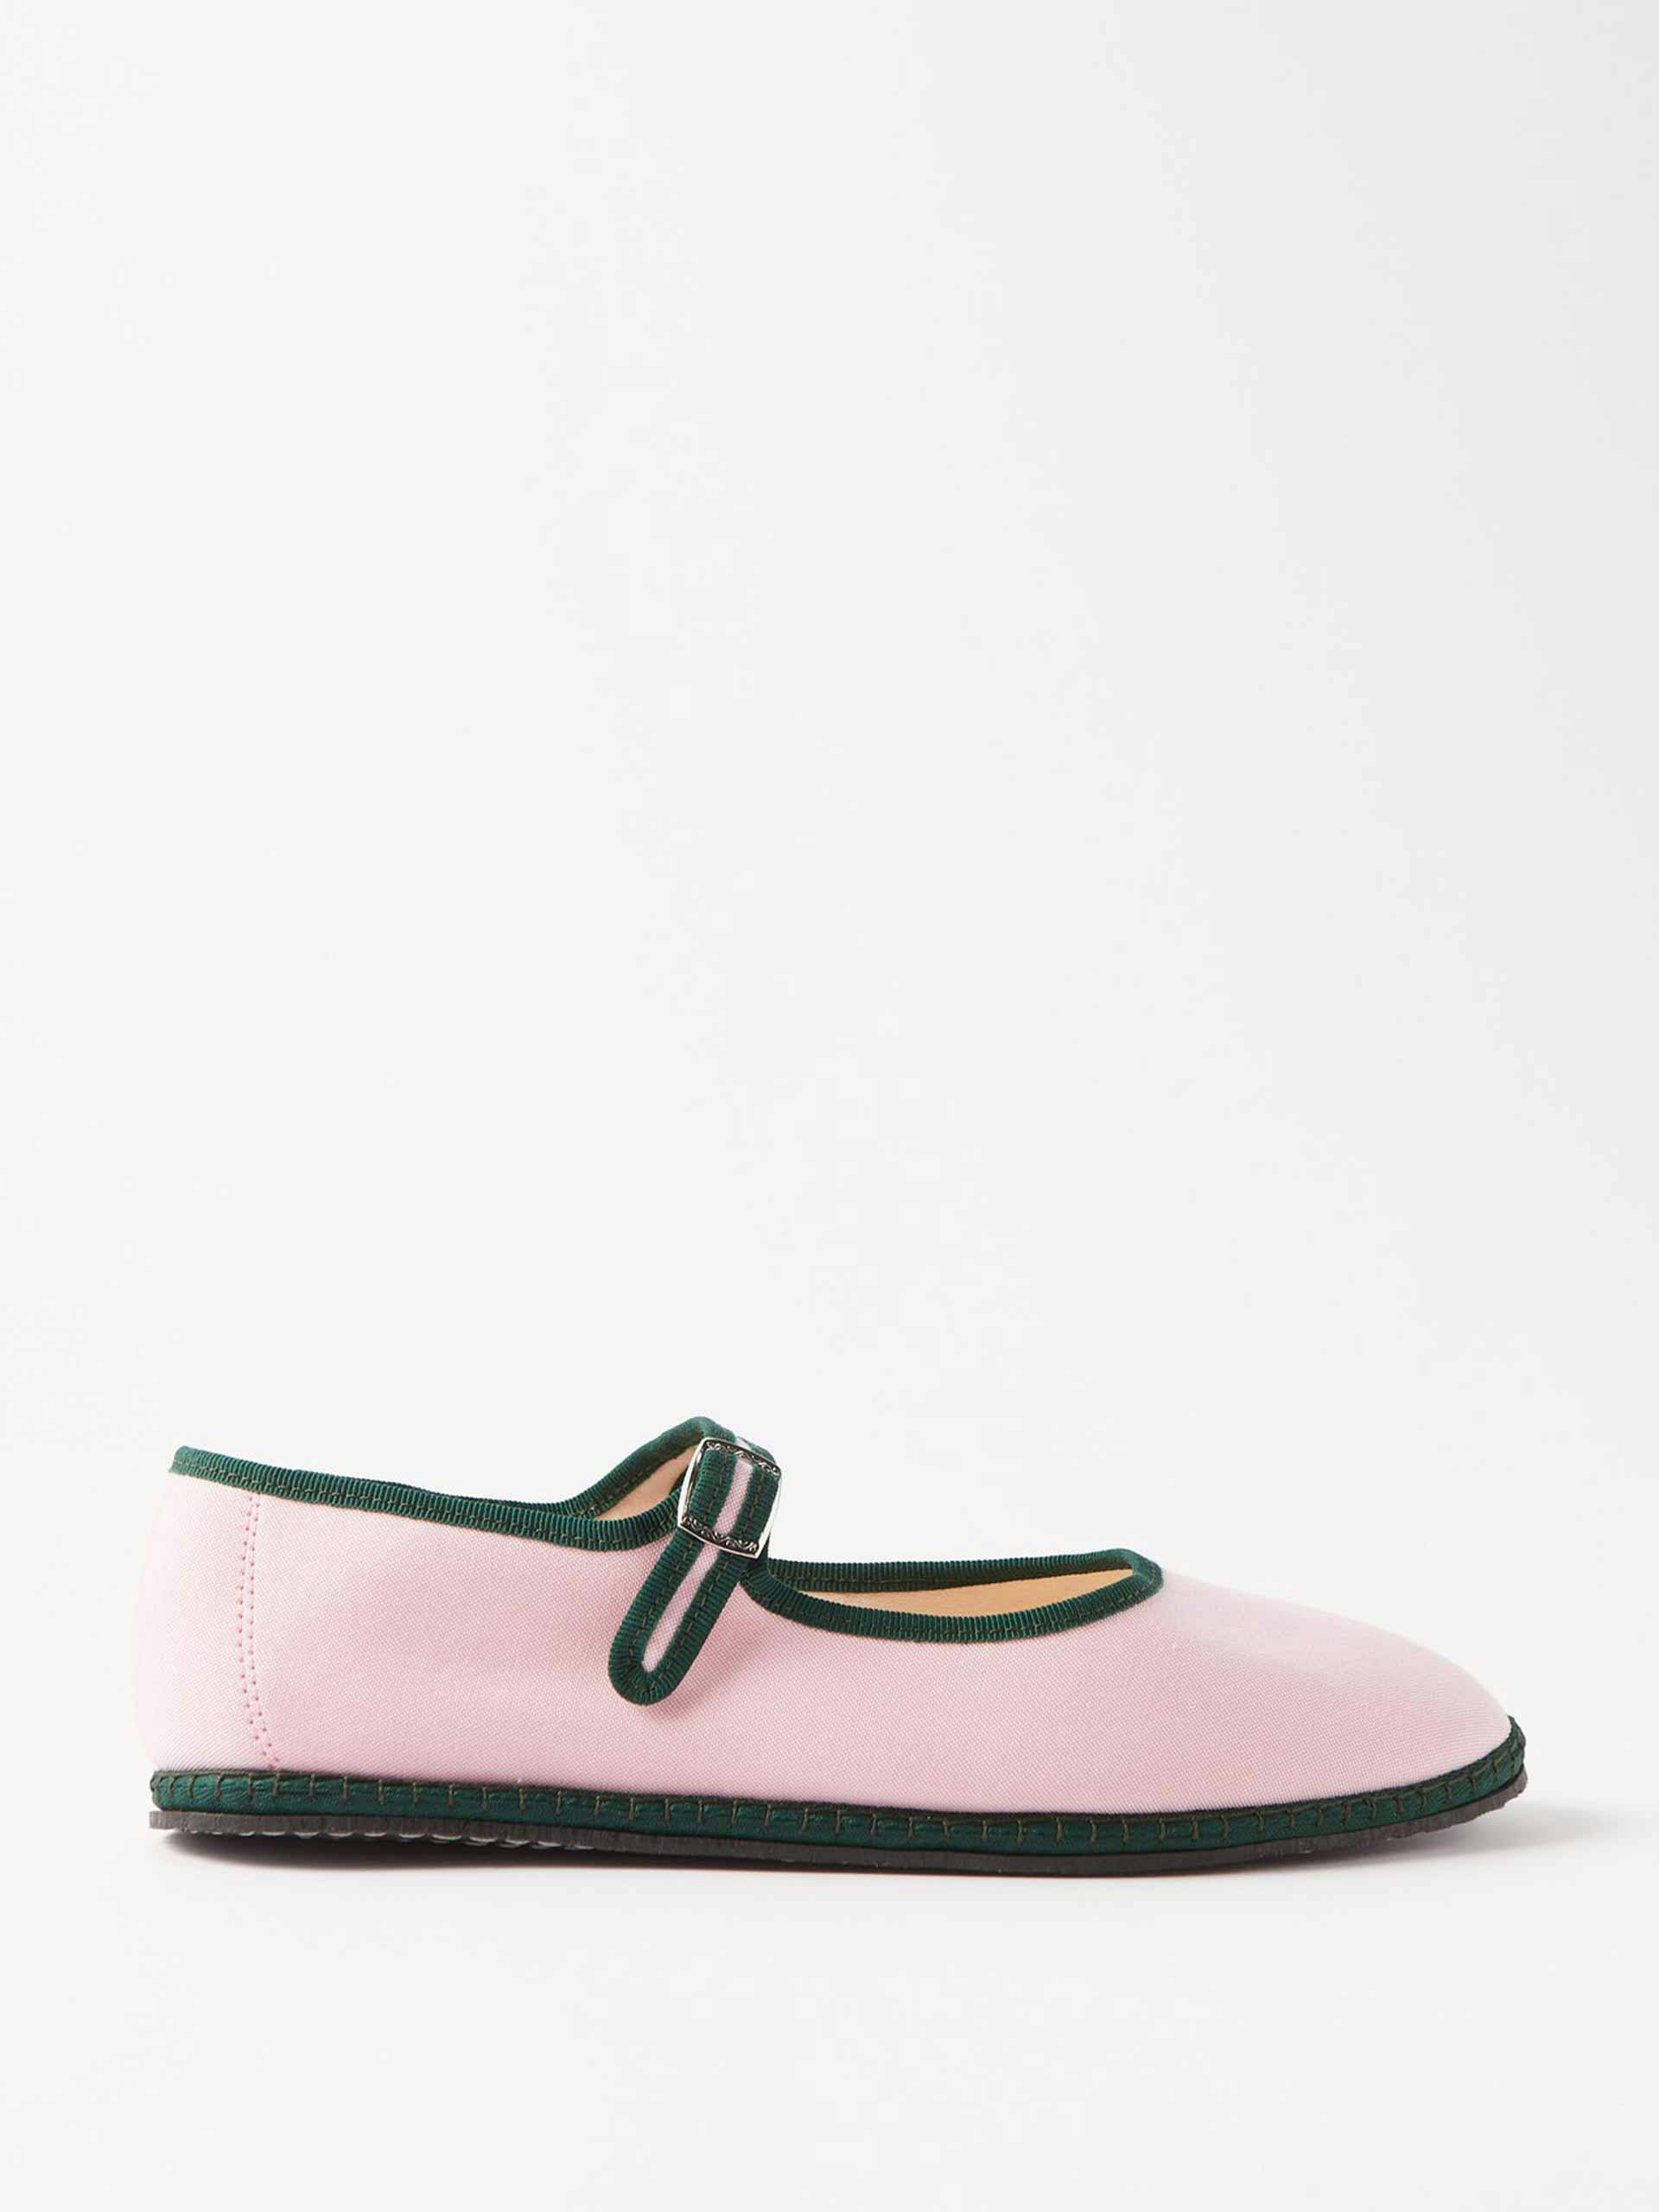 Cotton-canvas pink mary jane flats